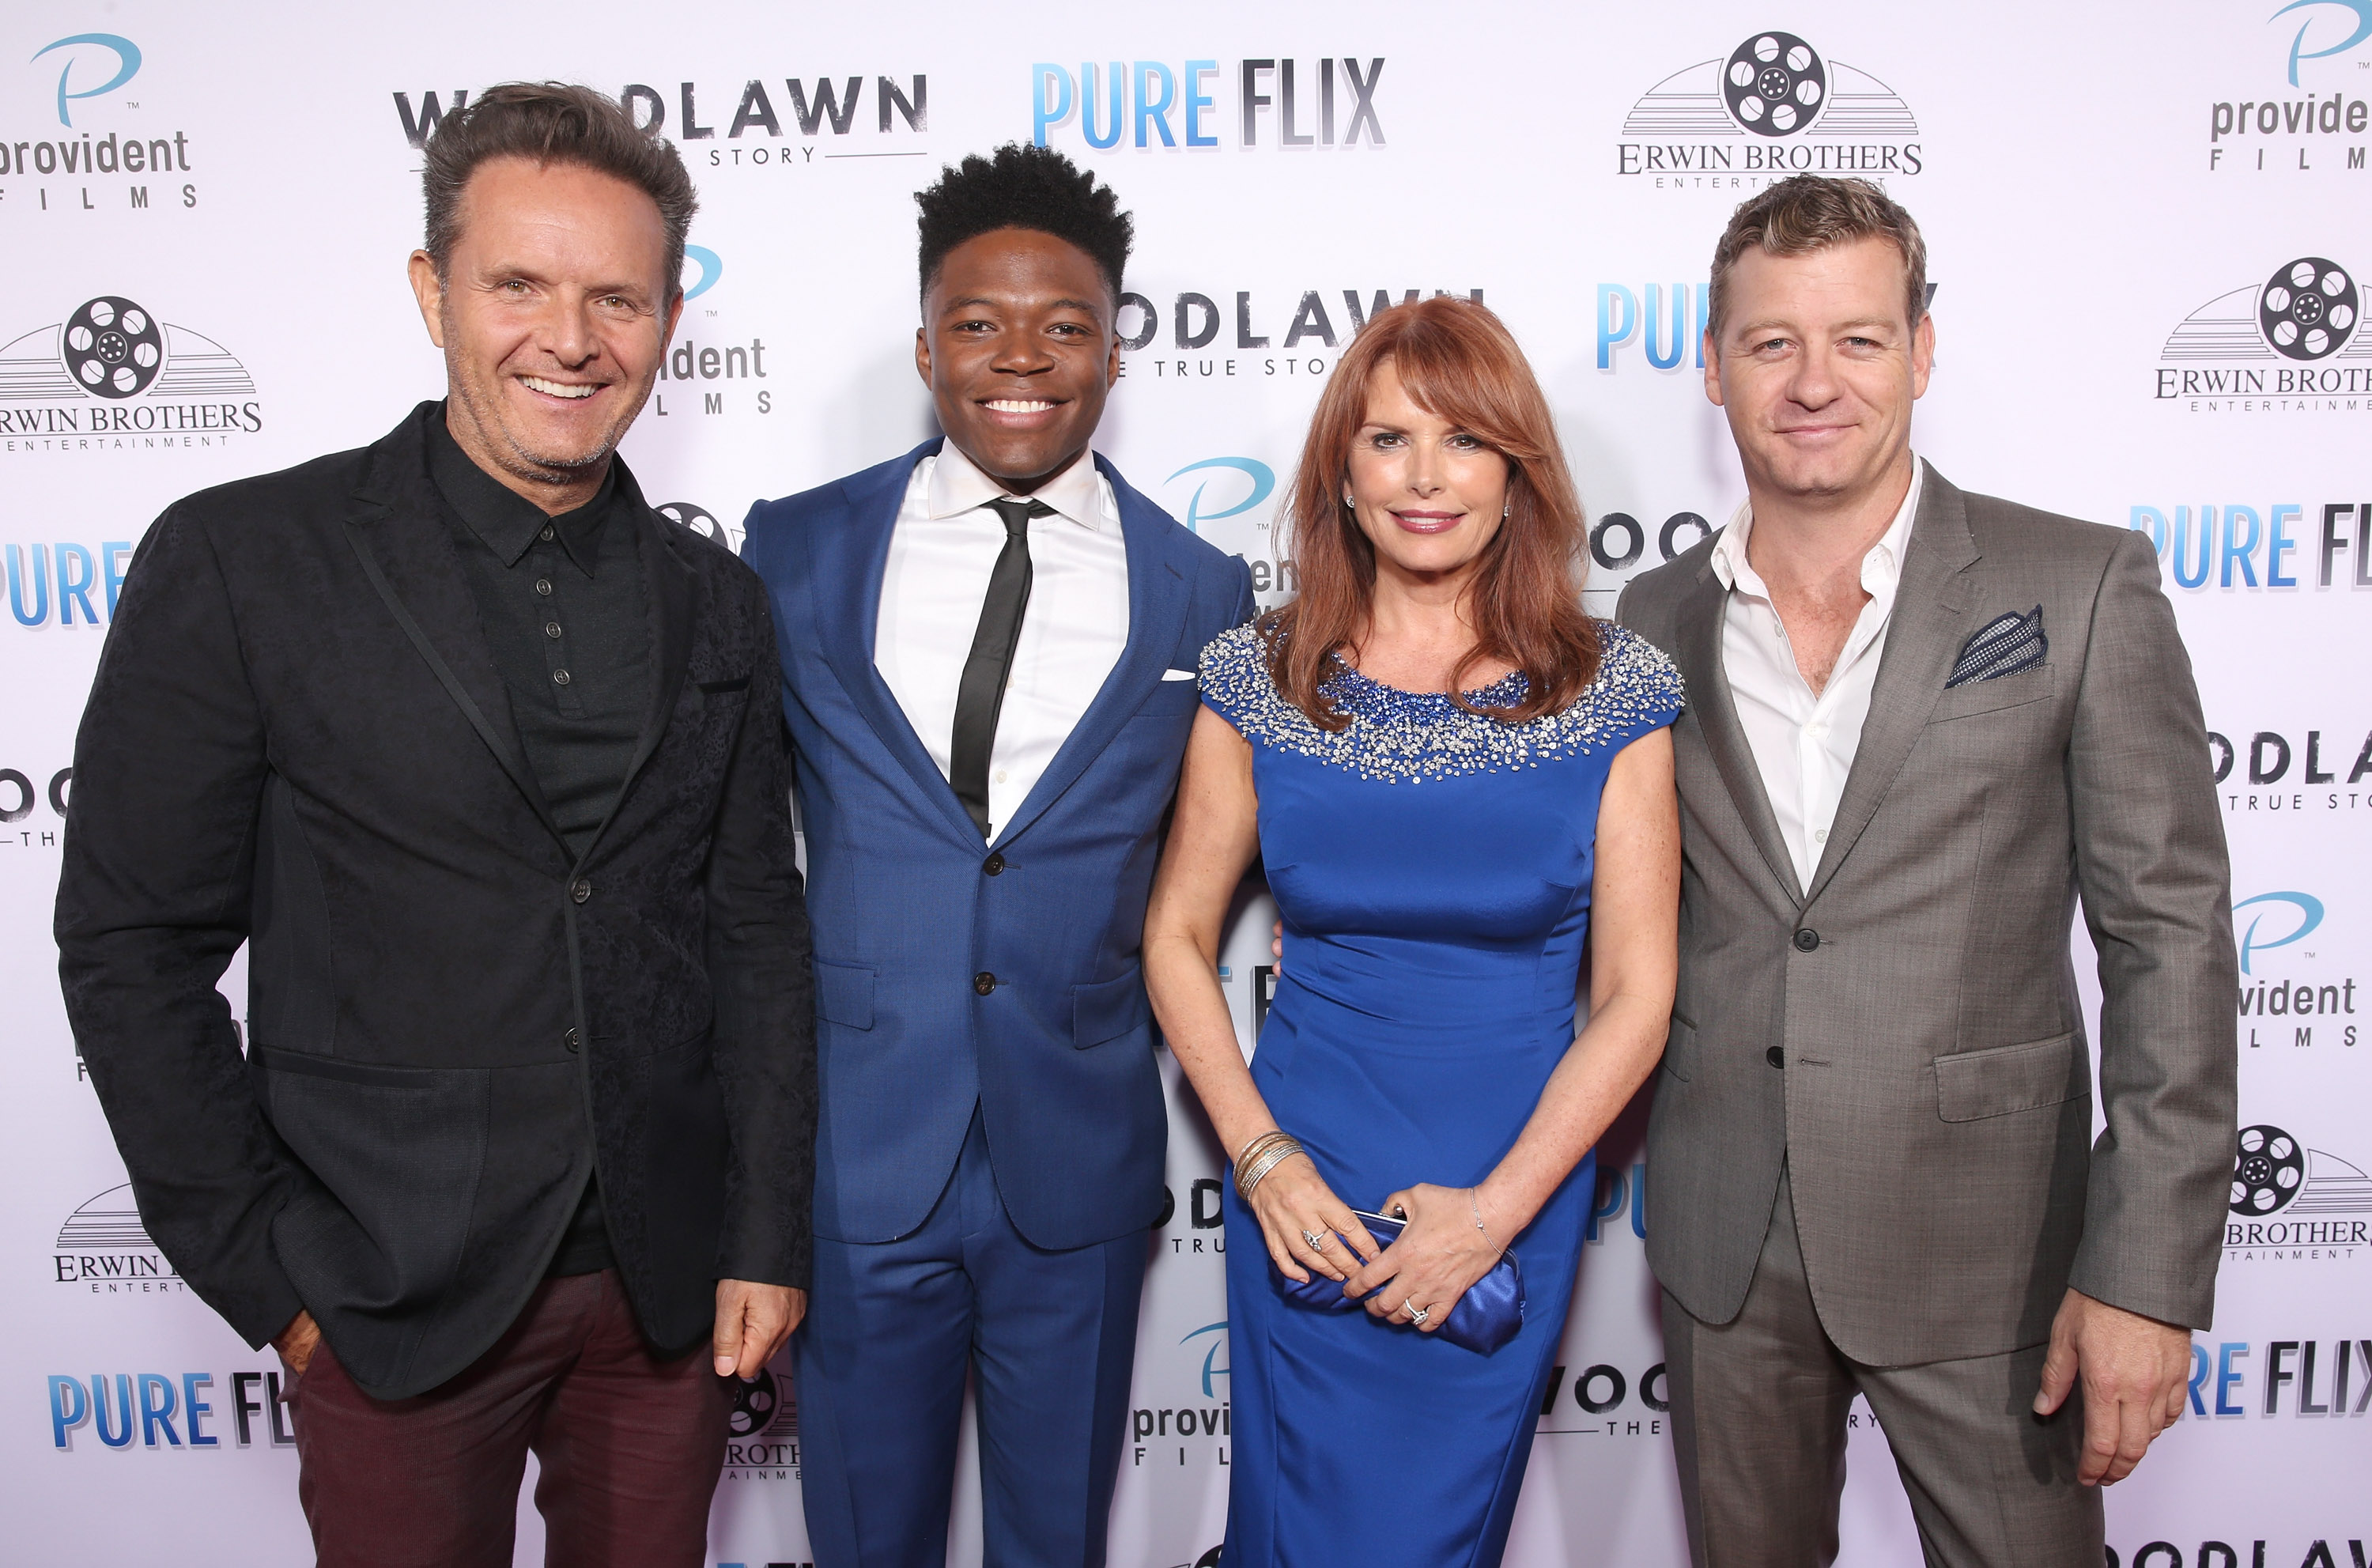 Still of Mark Burnett, Caleb Castille, Roma Downey, and Nic Bishop at the WOODLAWN premiere, at the Bruin Theatre. Westwood, CA. Monday October 5th 2015